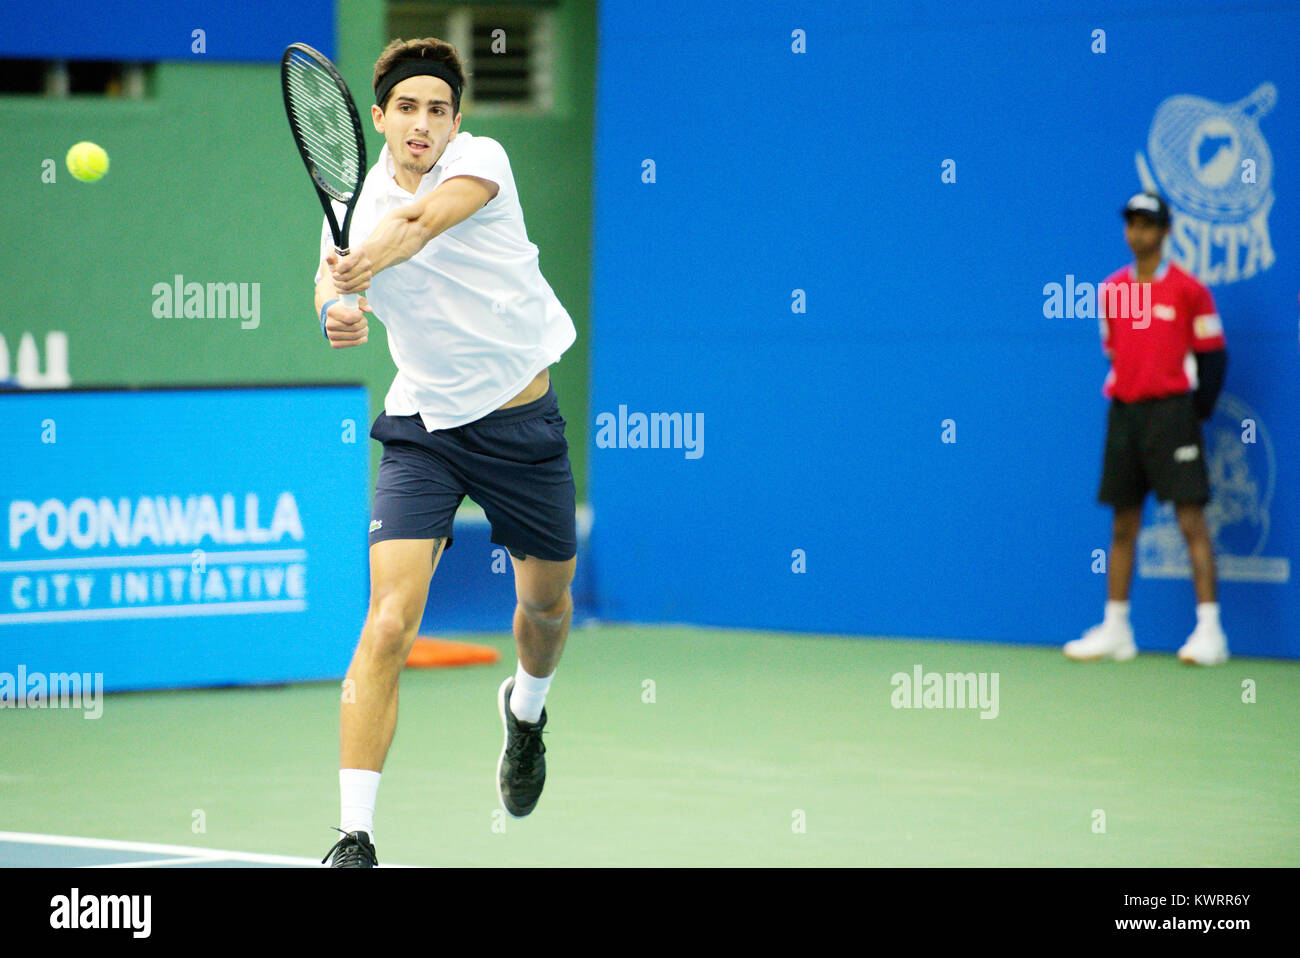 Pune, India. 4th Jan, 2018. Pierre-Hugues Herbert of France in action in a quarter final match of the Singles competition at Tata Open Maharashtra at the Mahalunge Balewadi Tennis Stadium in Pune, India. Credit: Karunesh Johri/Alamy Live News Stock Photo